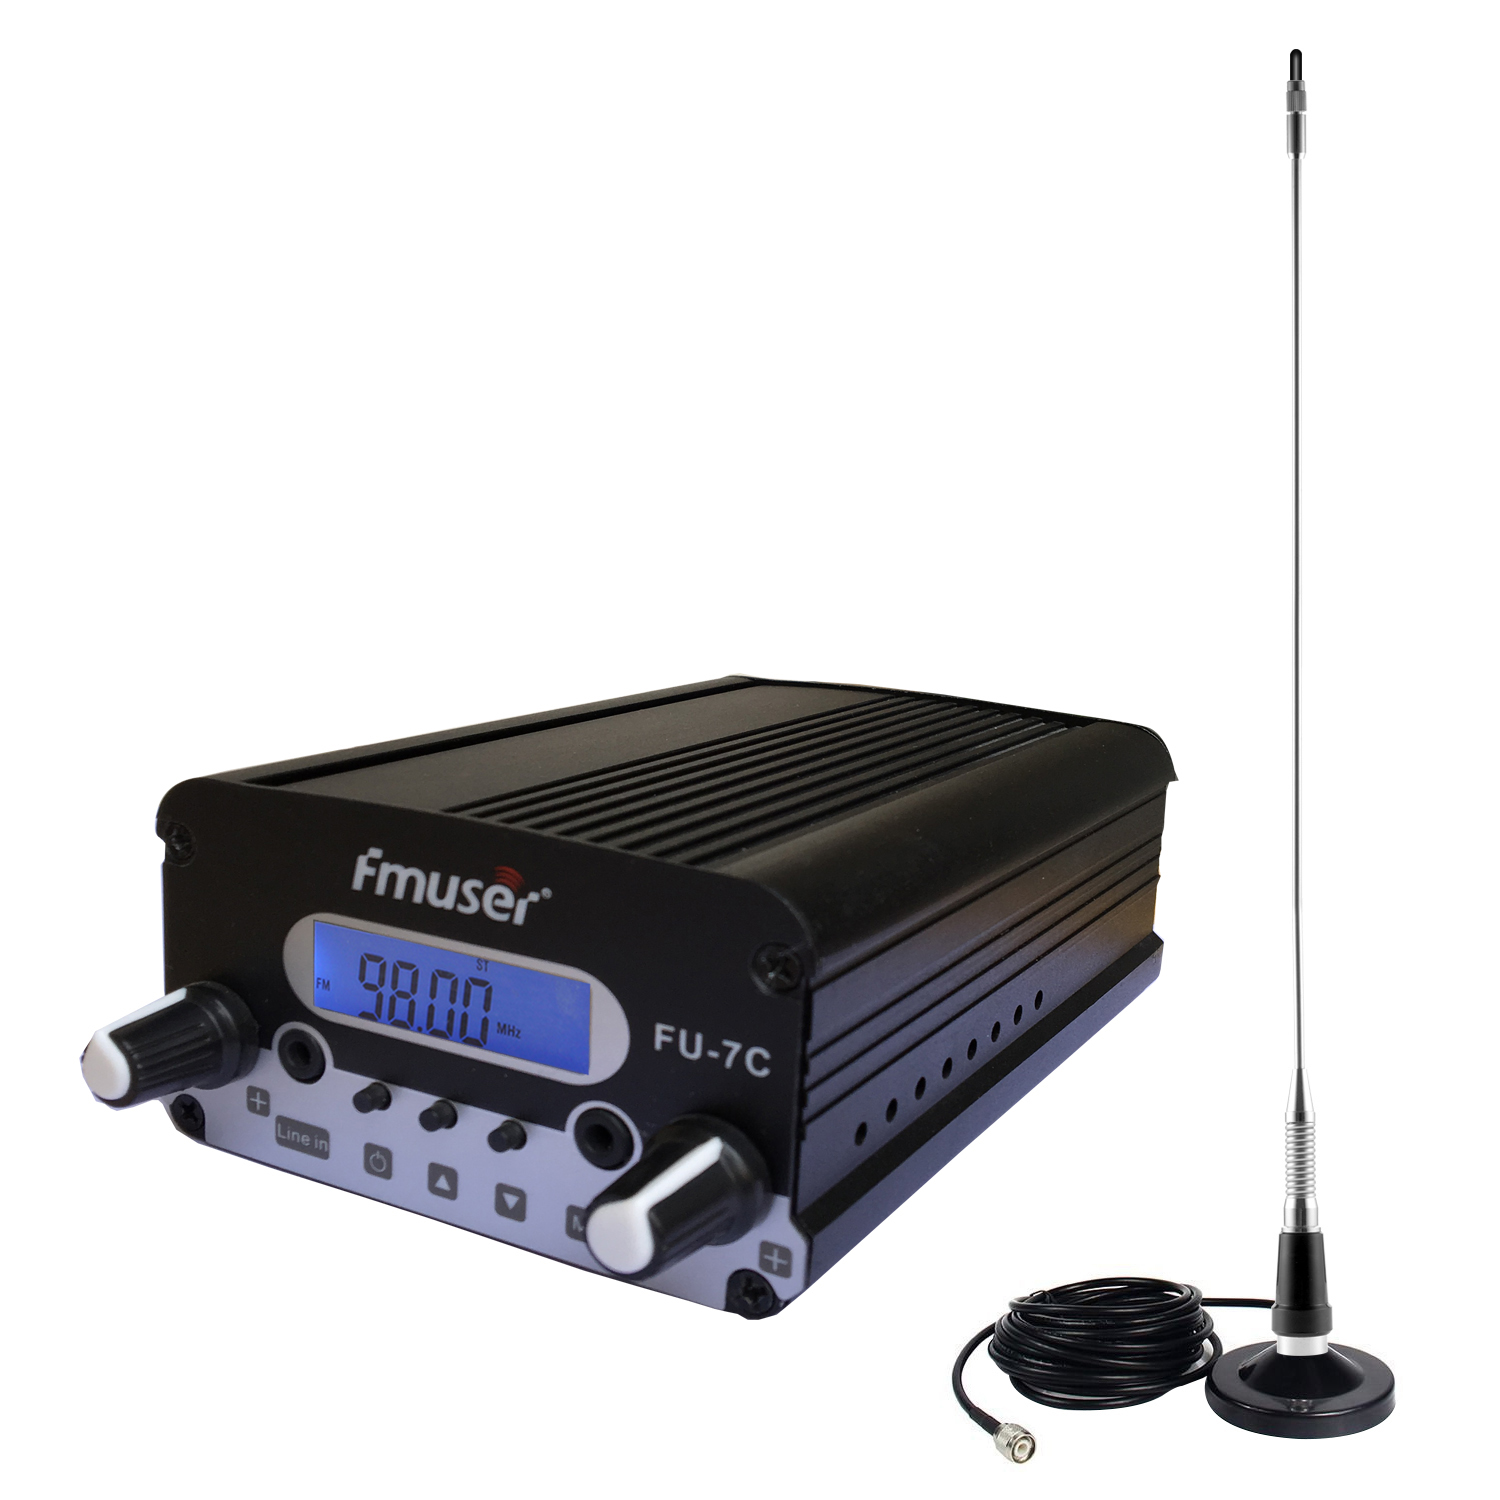 FMUSER 7W FM Transmitter Kit for Church Offers Drive-in Service to Practice Social Distancing